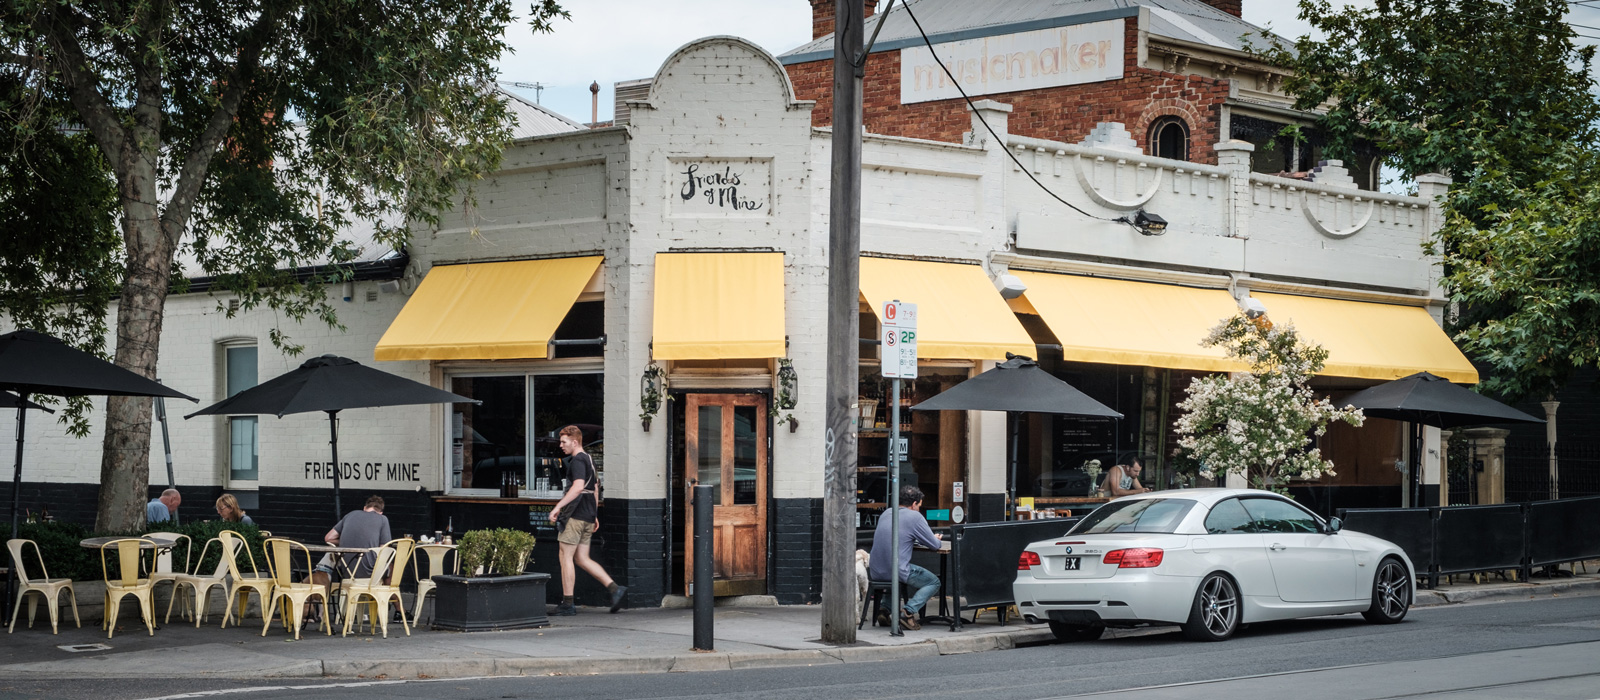 Cafe on Swan Street with outdoor tables and bright yellow awnings. 